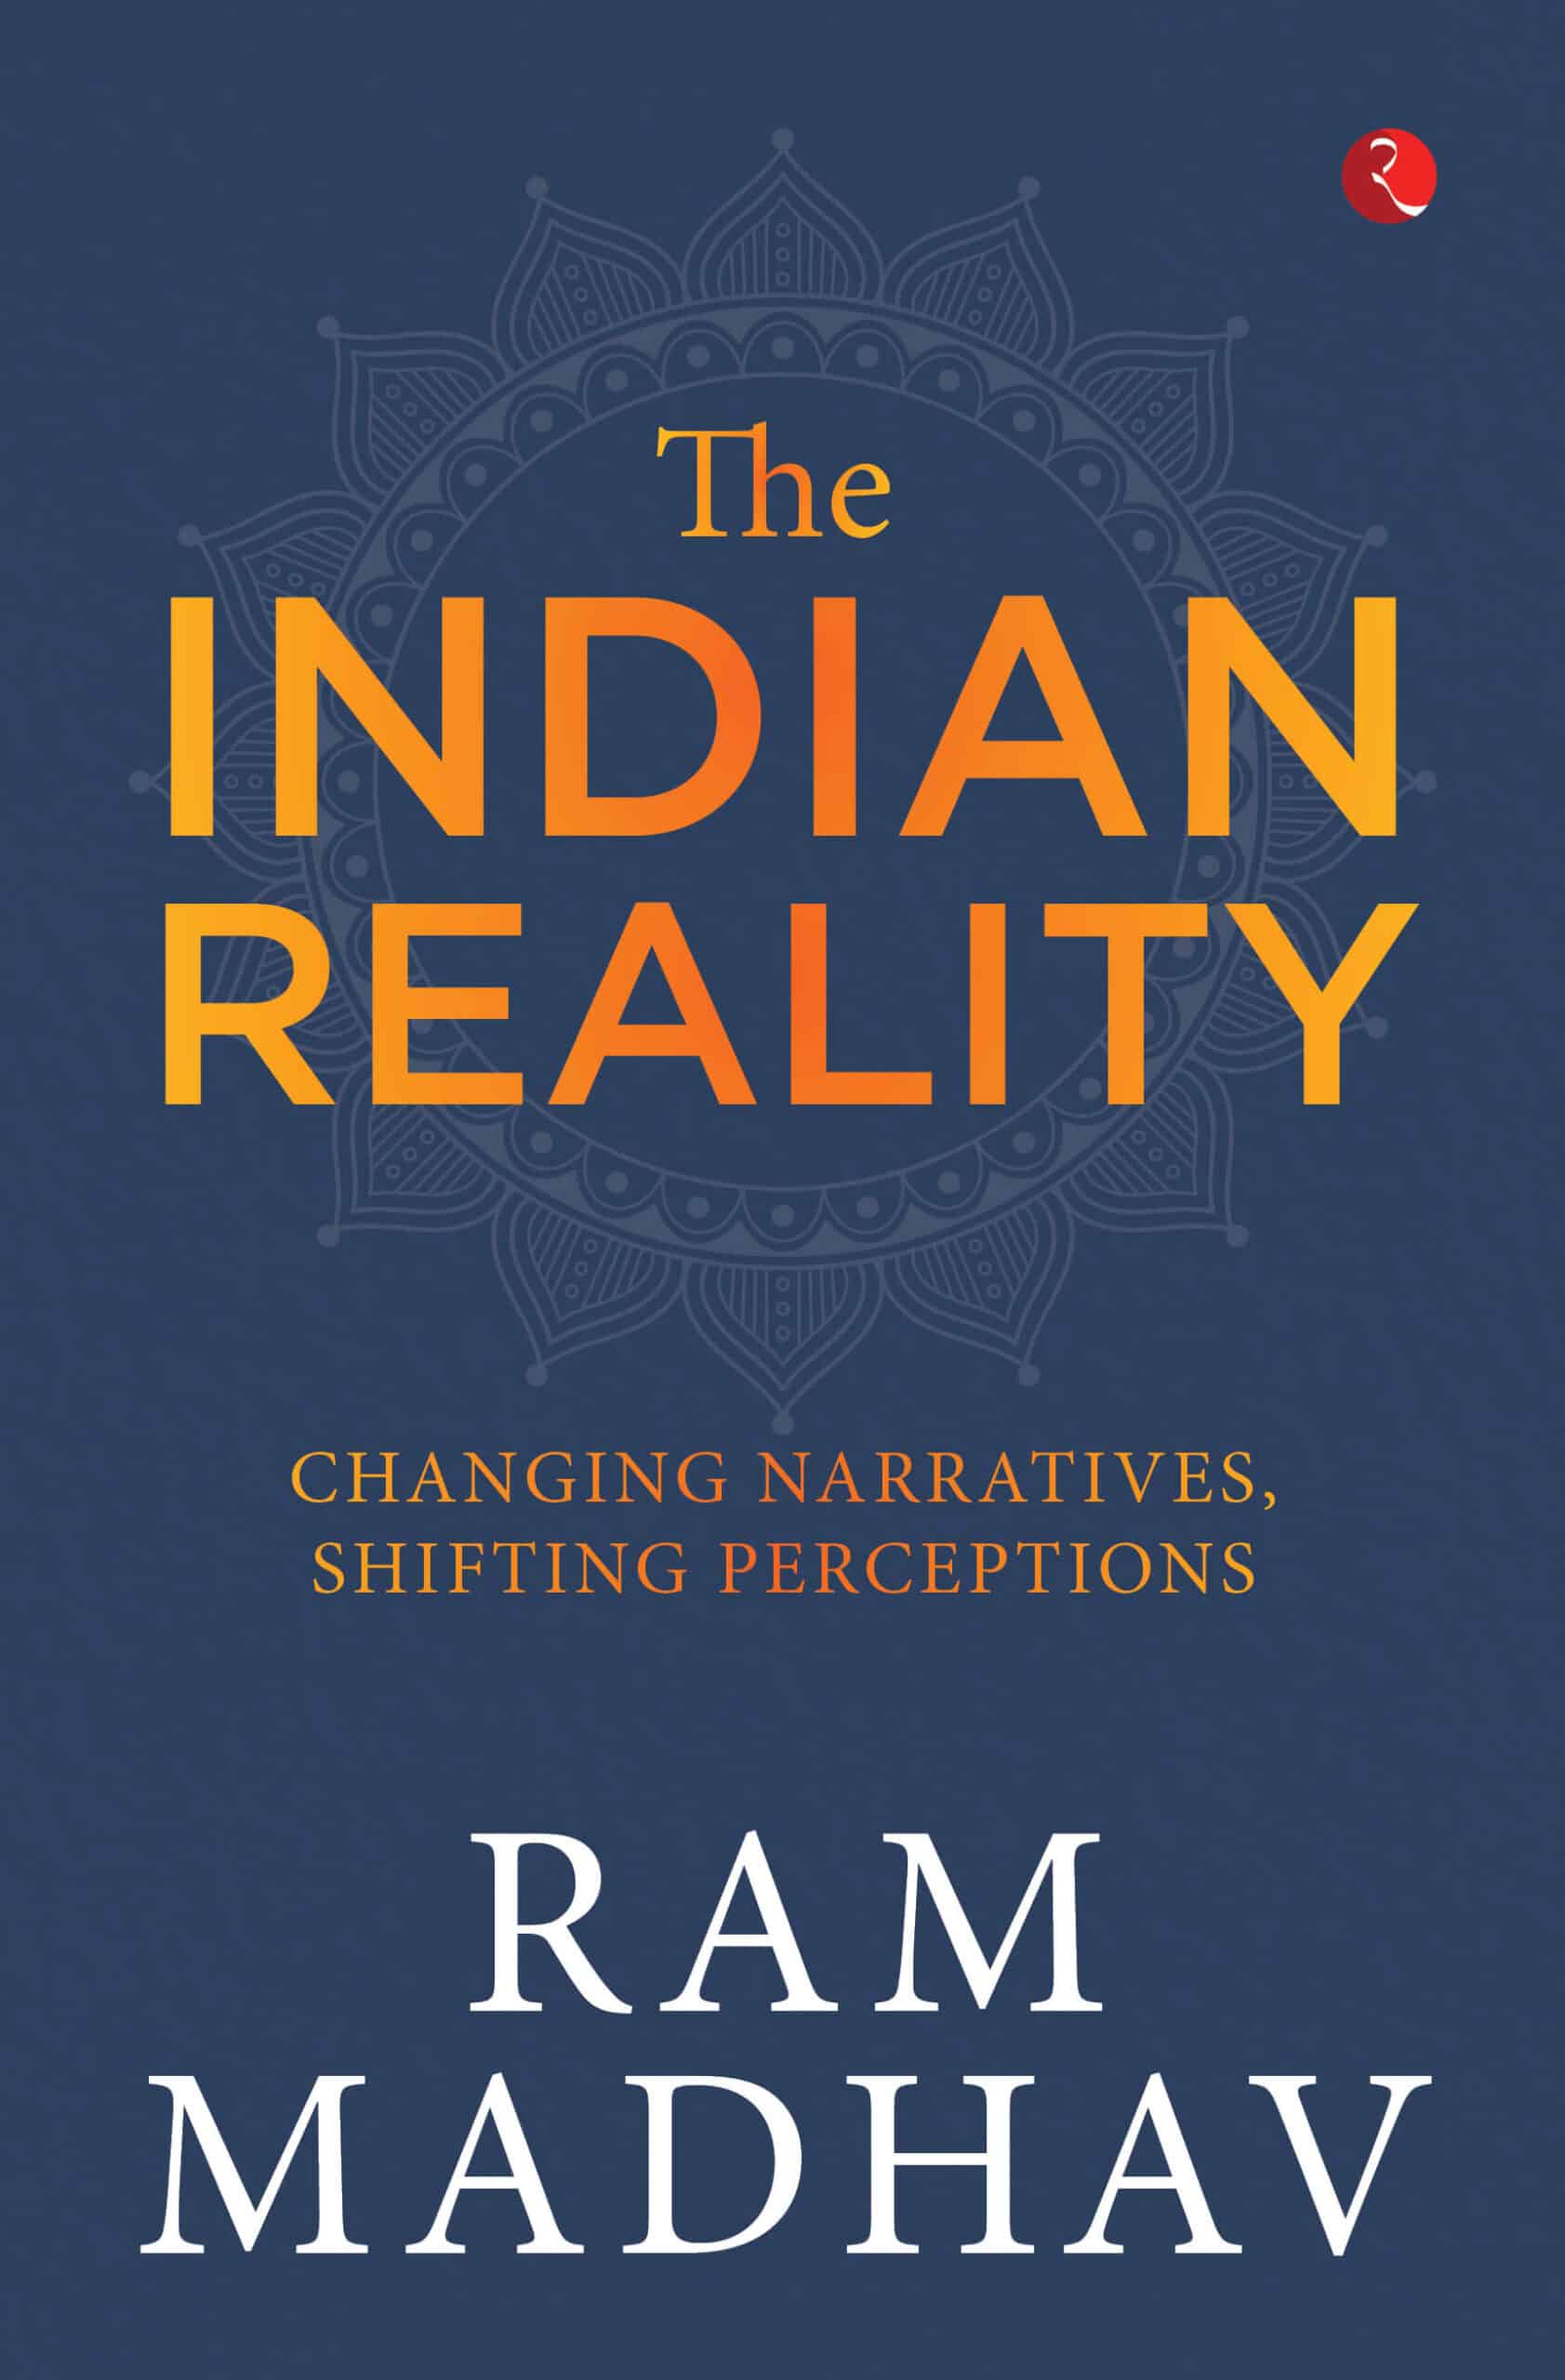 The Indian Reality - Changing Narratives, Shifting Perceptions